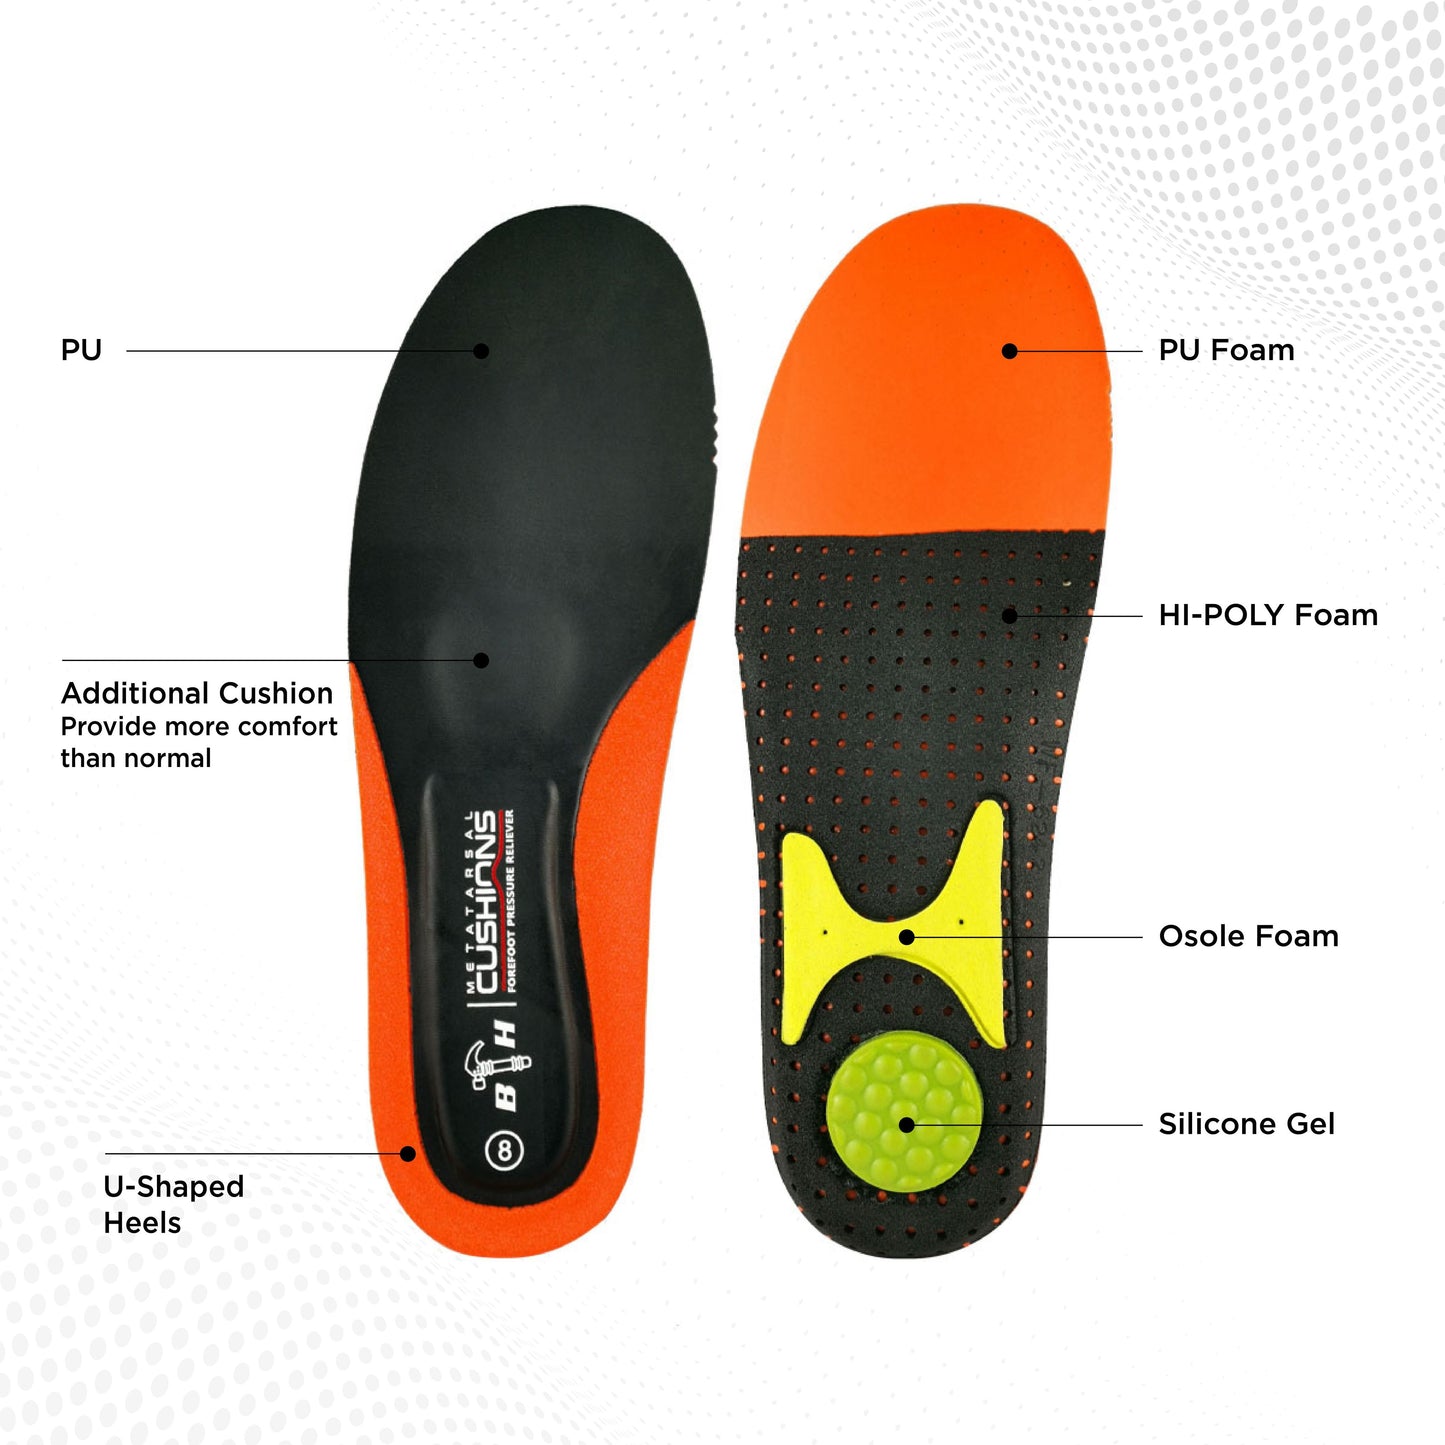 "Experience ultimate comfort with Black Hammer Pro Series Metatarsal Cushions Insole WF6242. Made of PU, featuring additional cushioning for superior comfort, U-shaped heels, and a blend of PU foam, HI-POLY foam, Osole foam, and silicone gel. Unisex design fits all shoe sizes, reduces stress, and ensures year-round comfort."